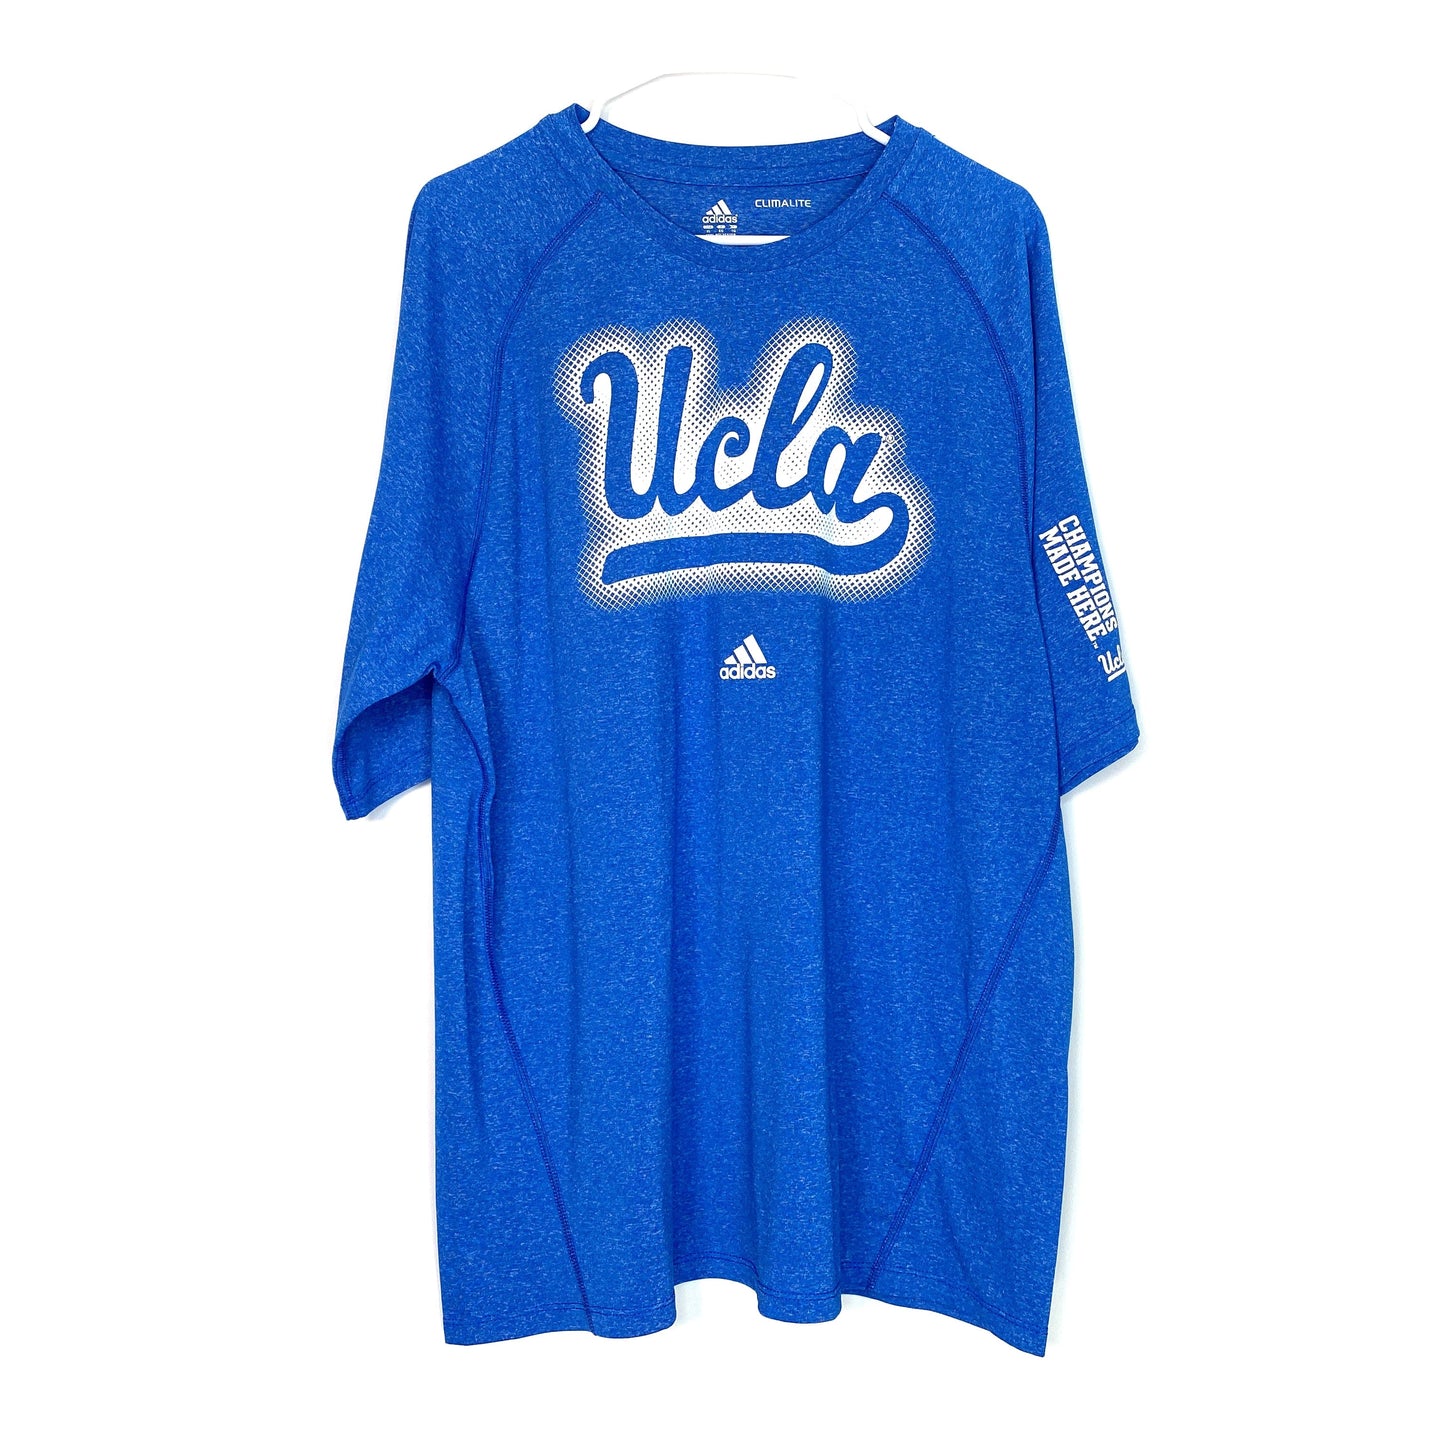 adidas Mens Size XL Blue T-Shirt UCLA Champions Made Here